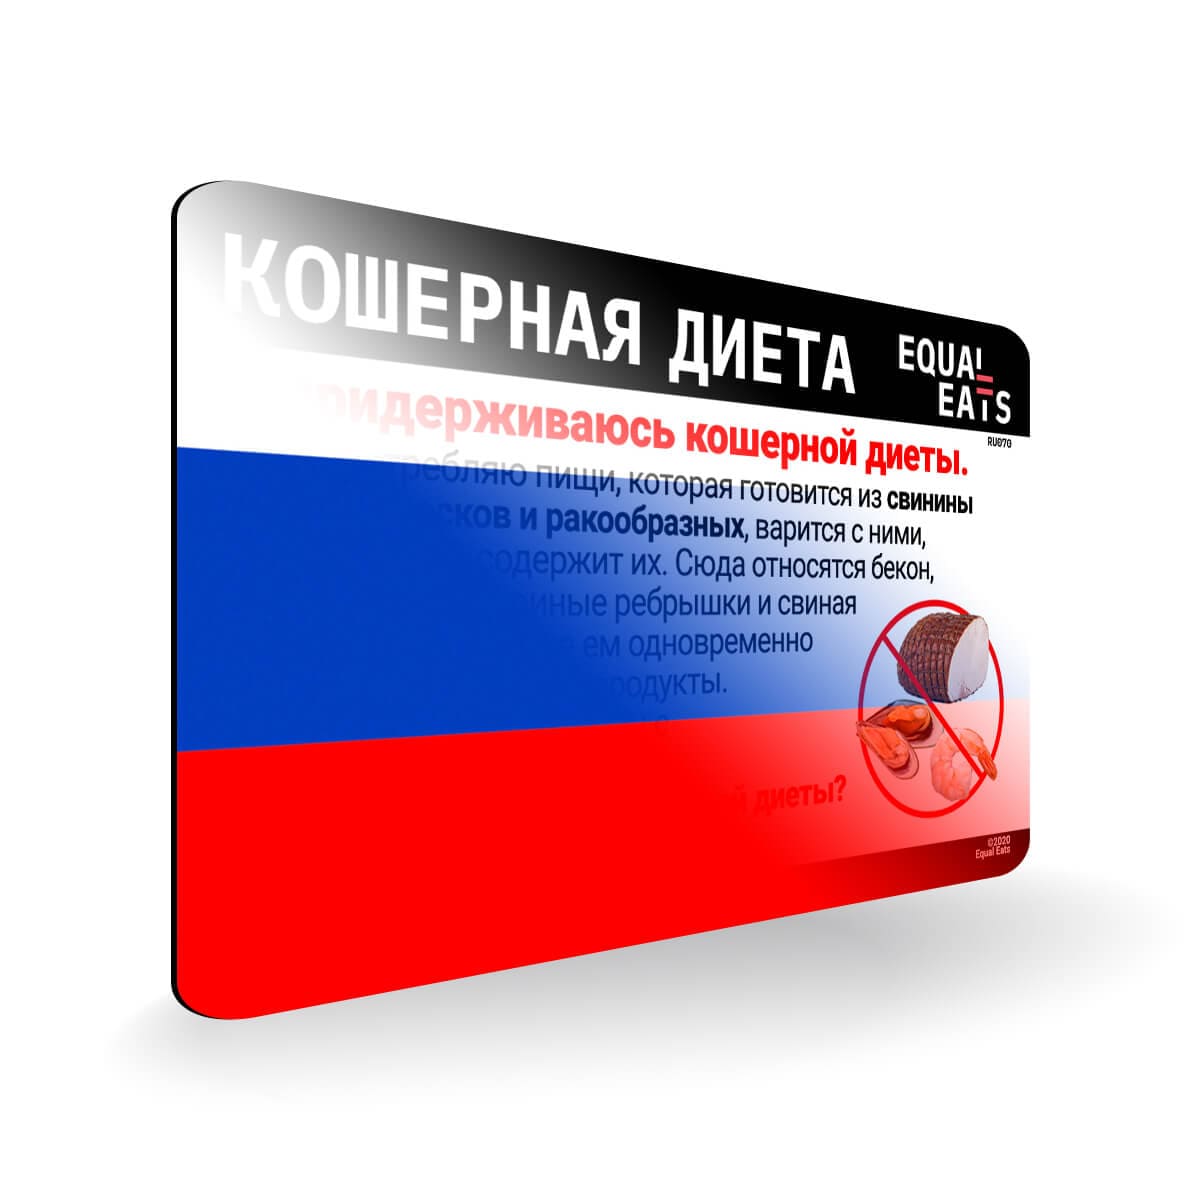 Kosher Diet in Russian. Kosher Card for Russia